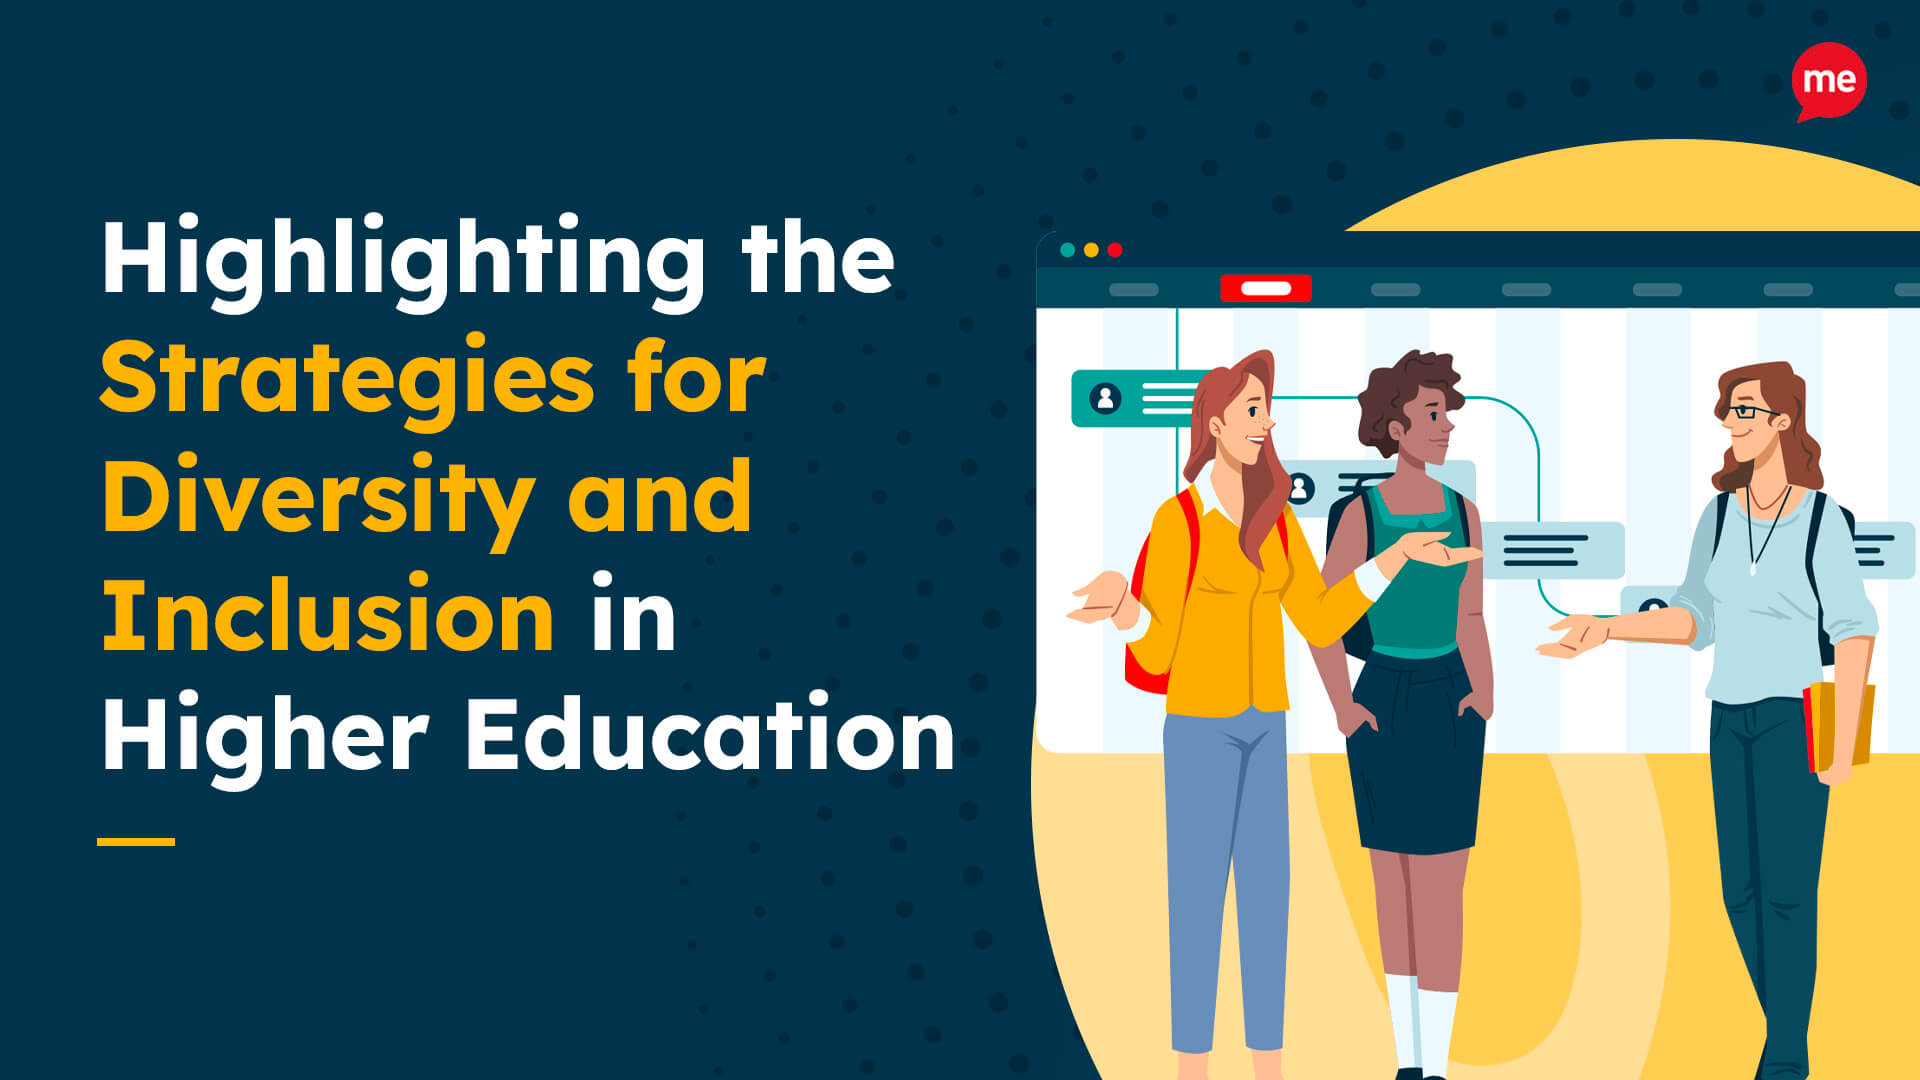 Highlighting the Strategies for Diversity and Inclusion in Higher Education